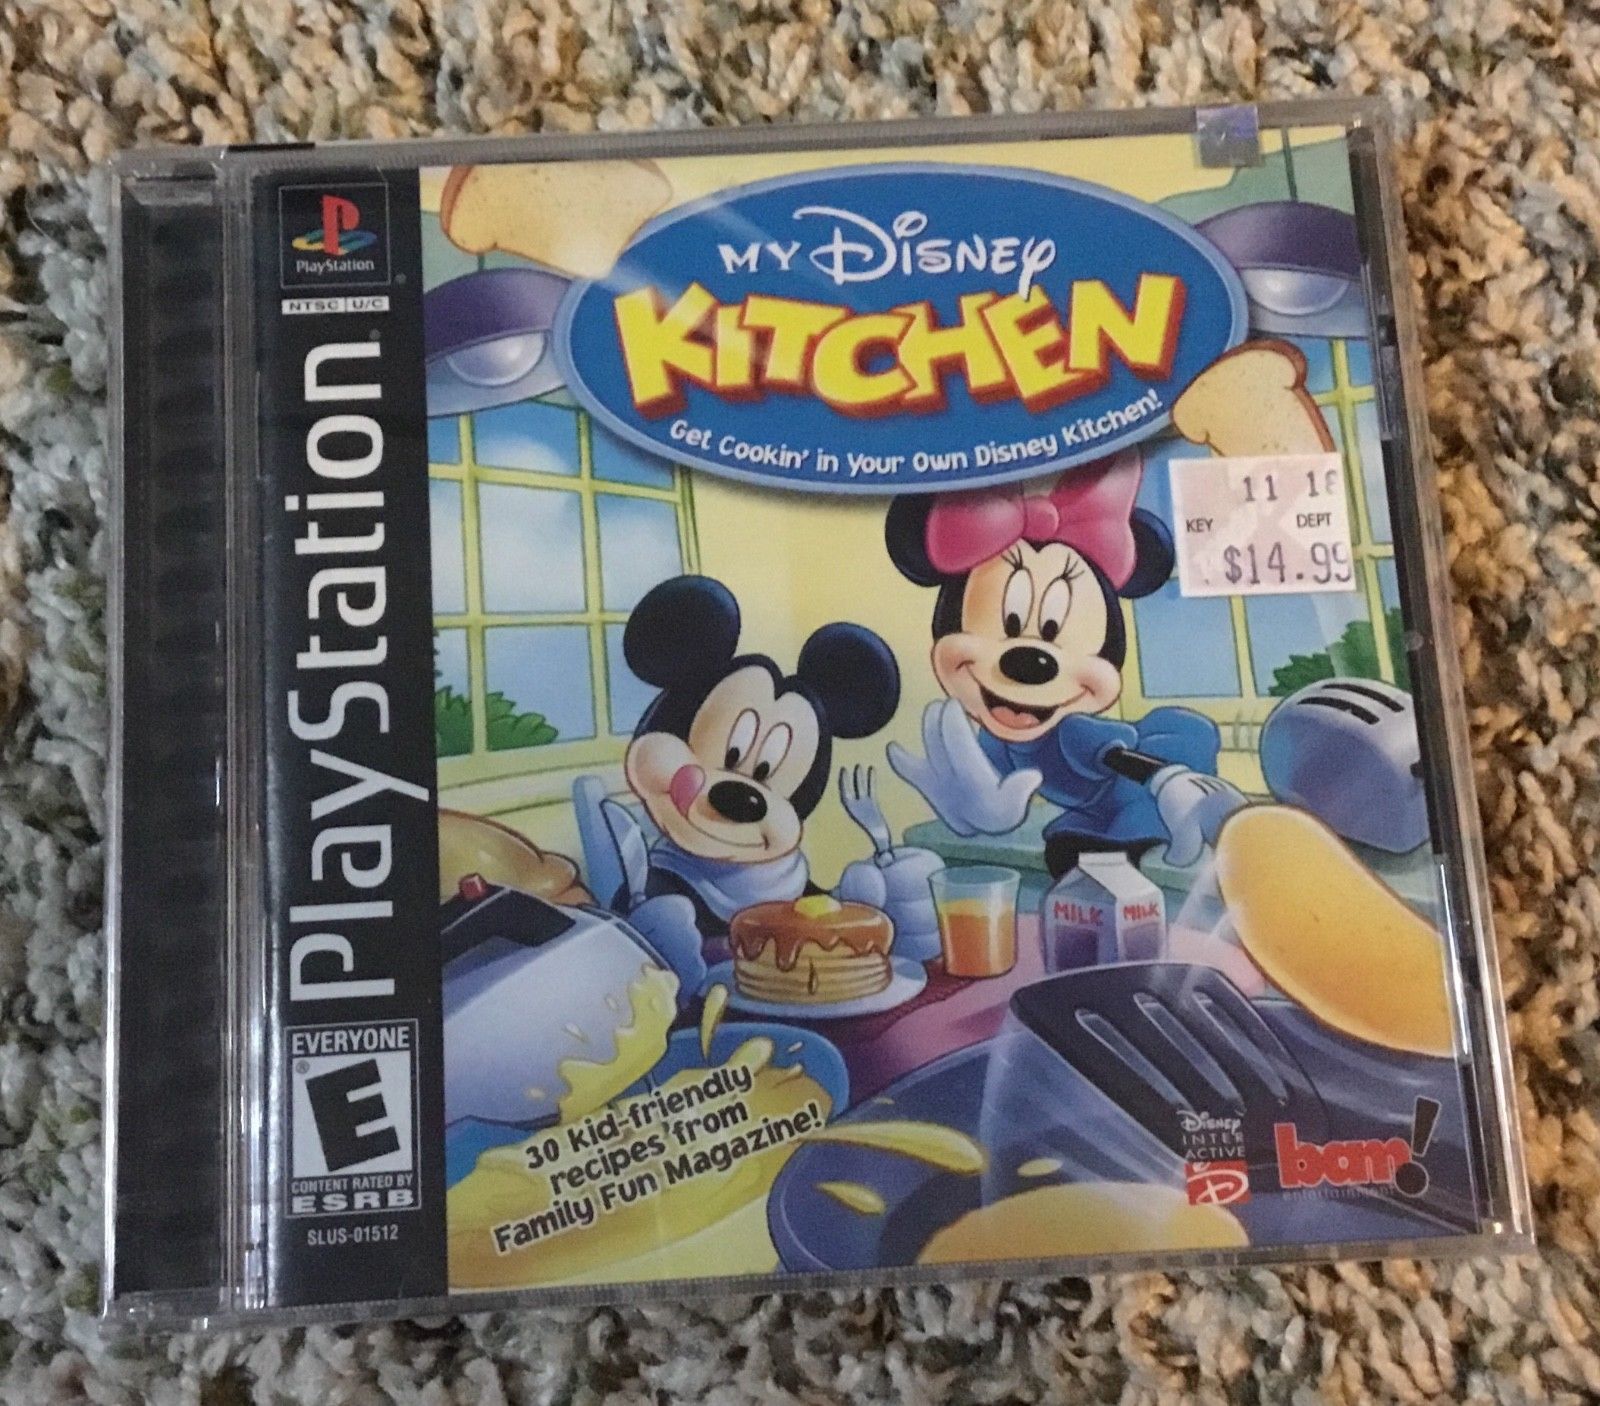 Disney my dream kitchen ps1 download for computer